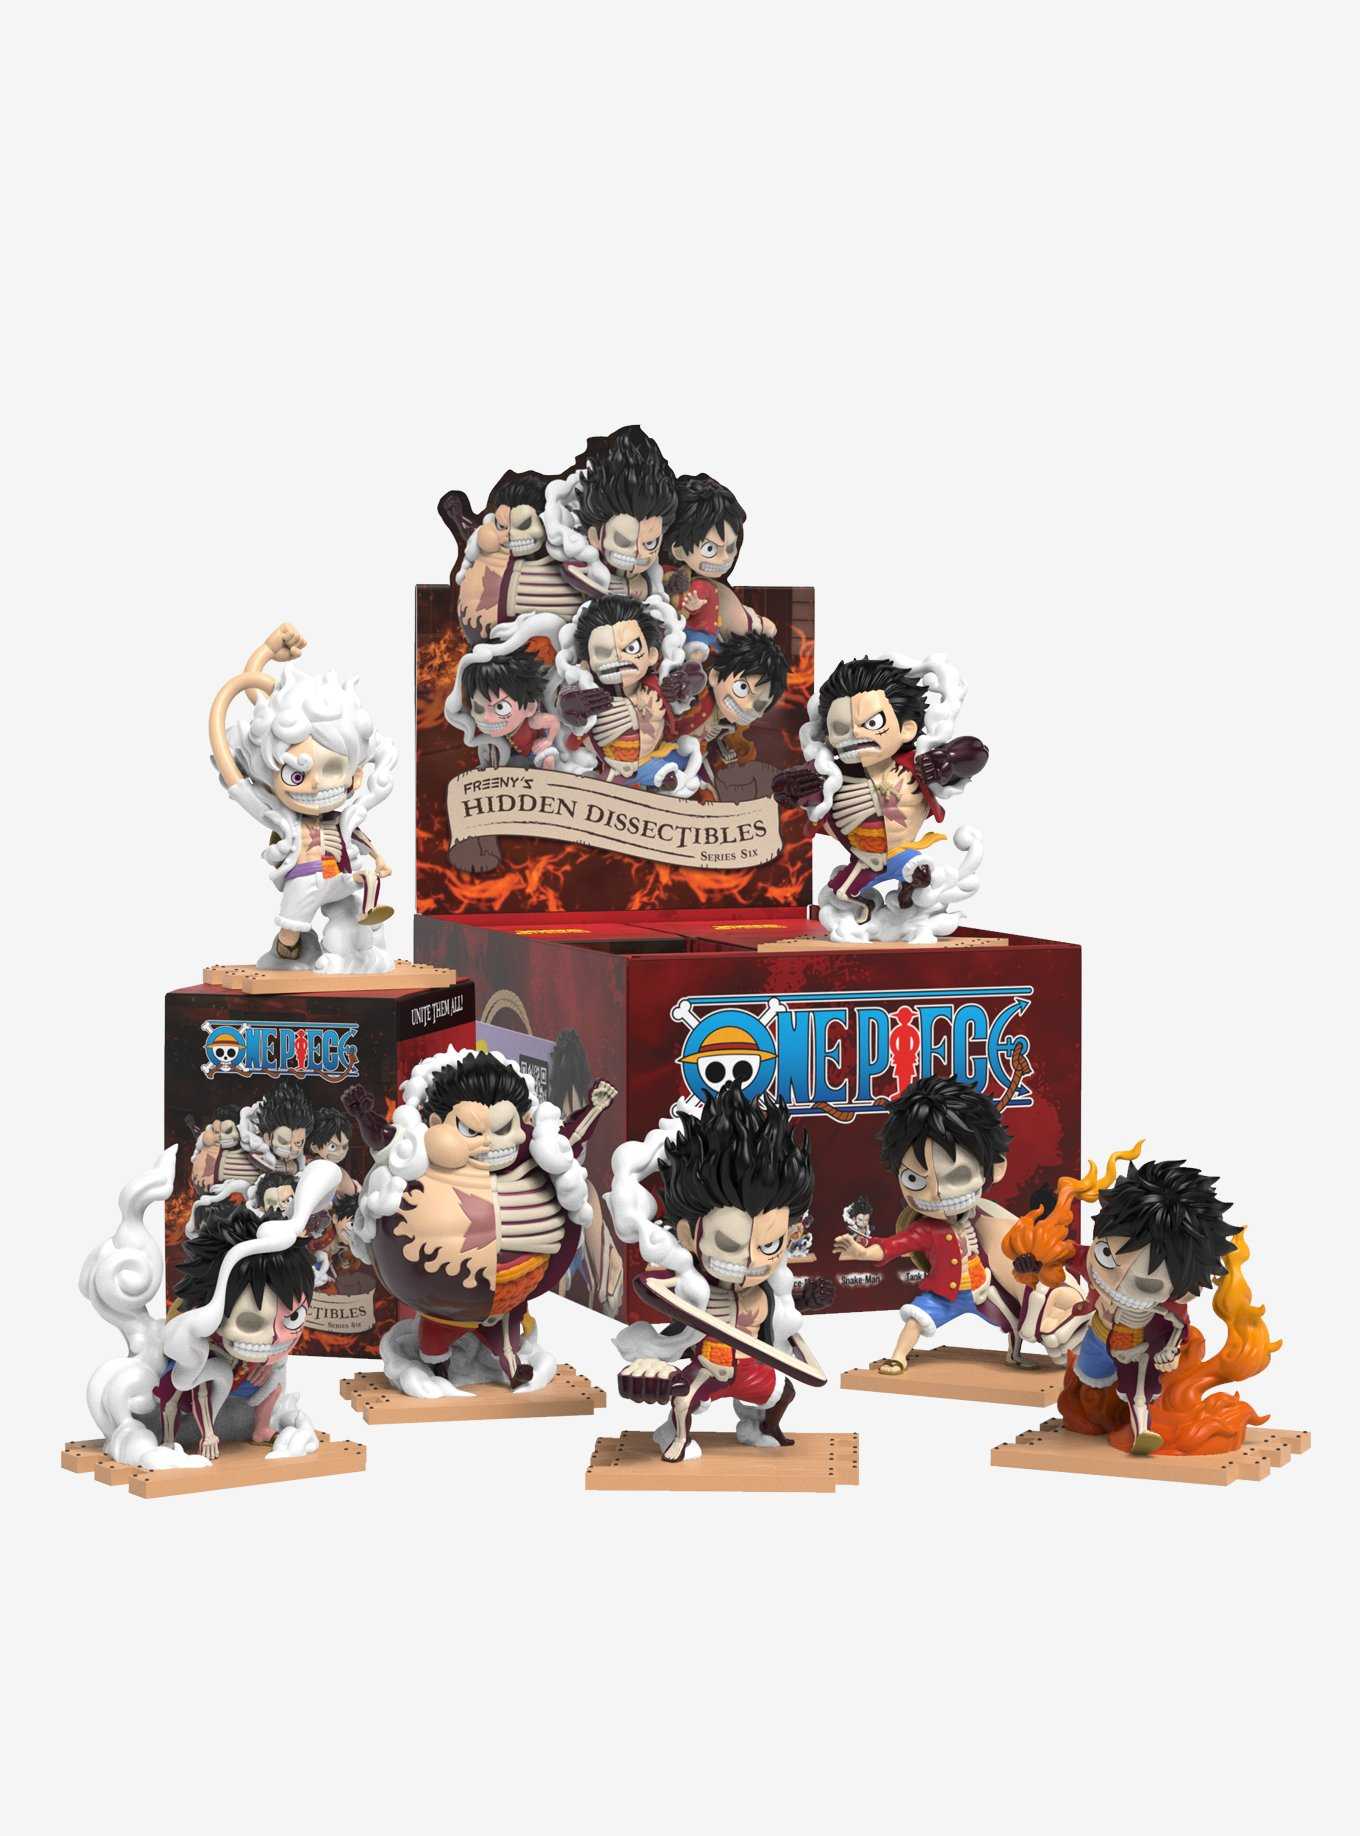 Official One Piece Merch Collection - One Piece Universe Store